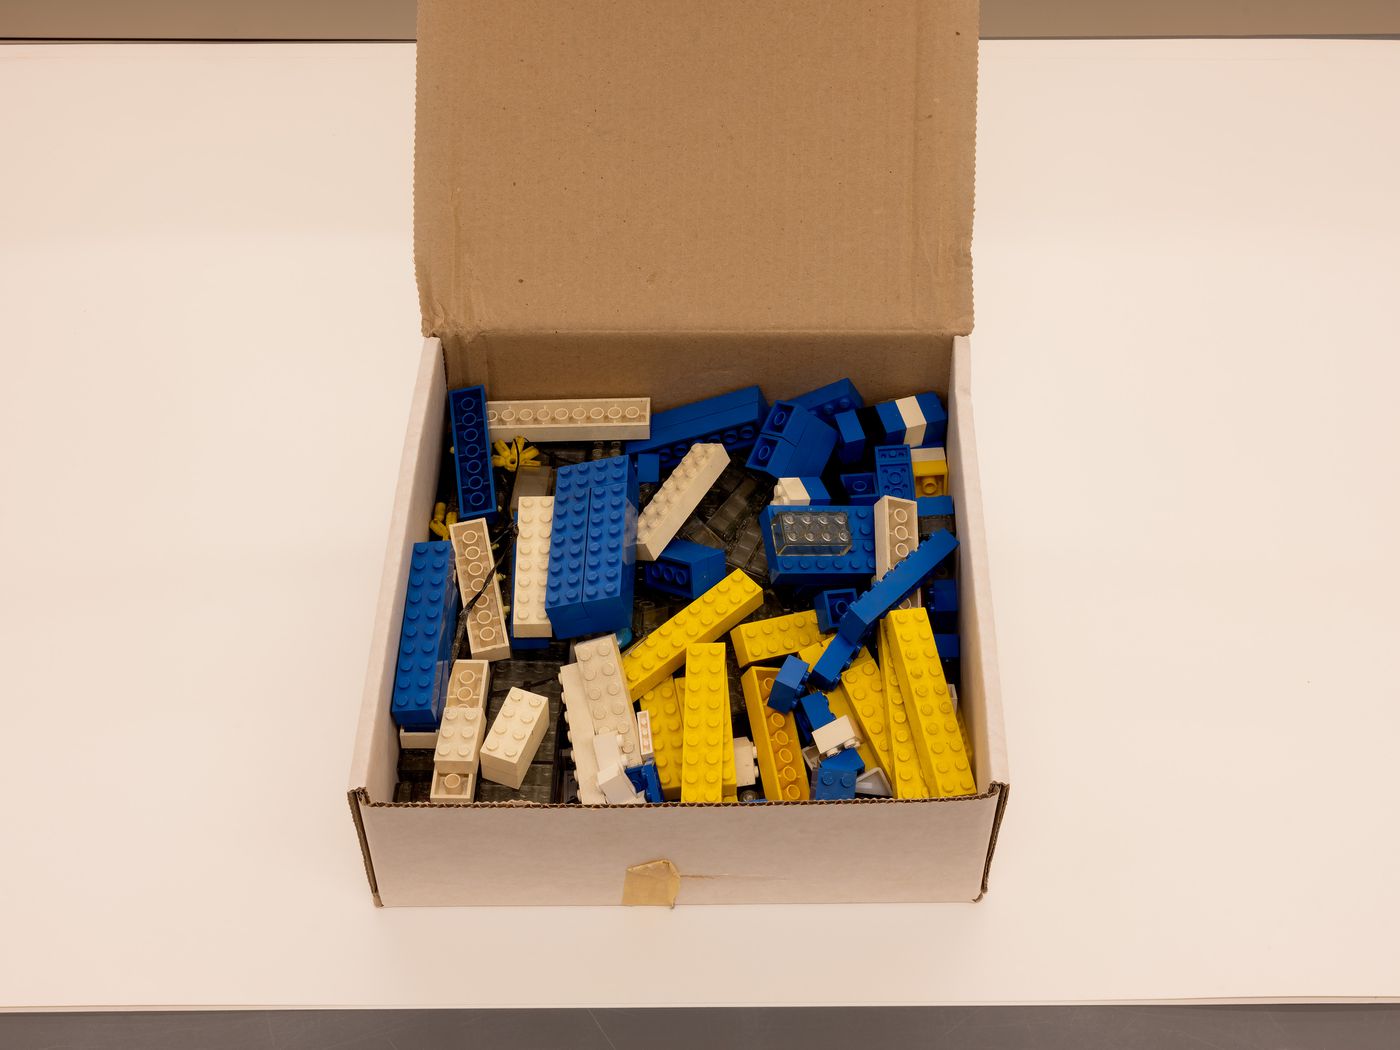 The Museum Is Not Enough: View of a box with Lego bricks